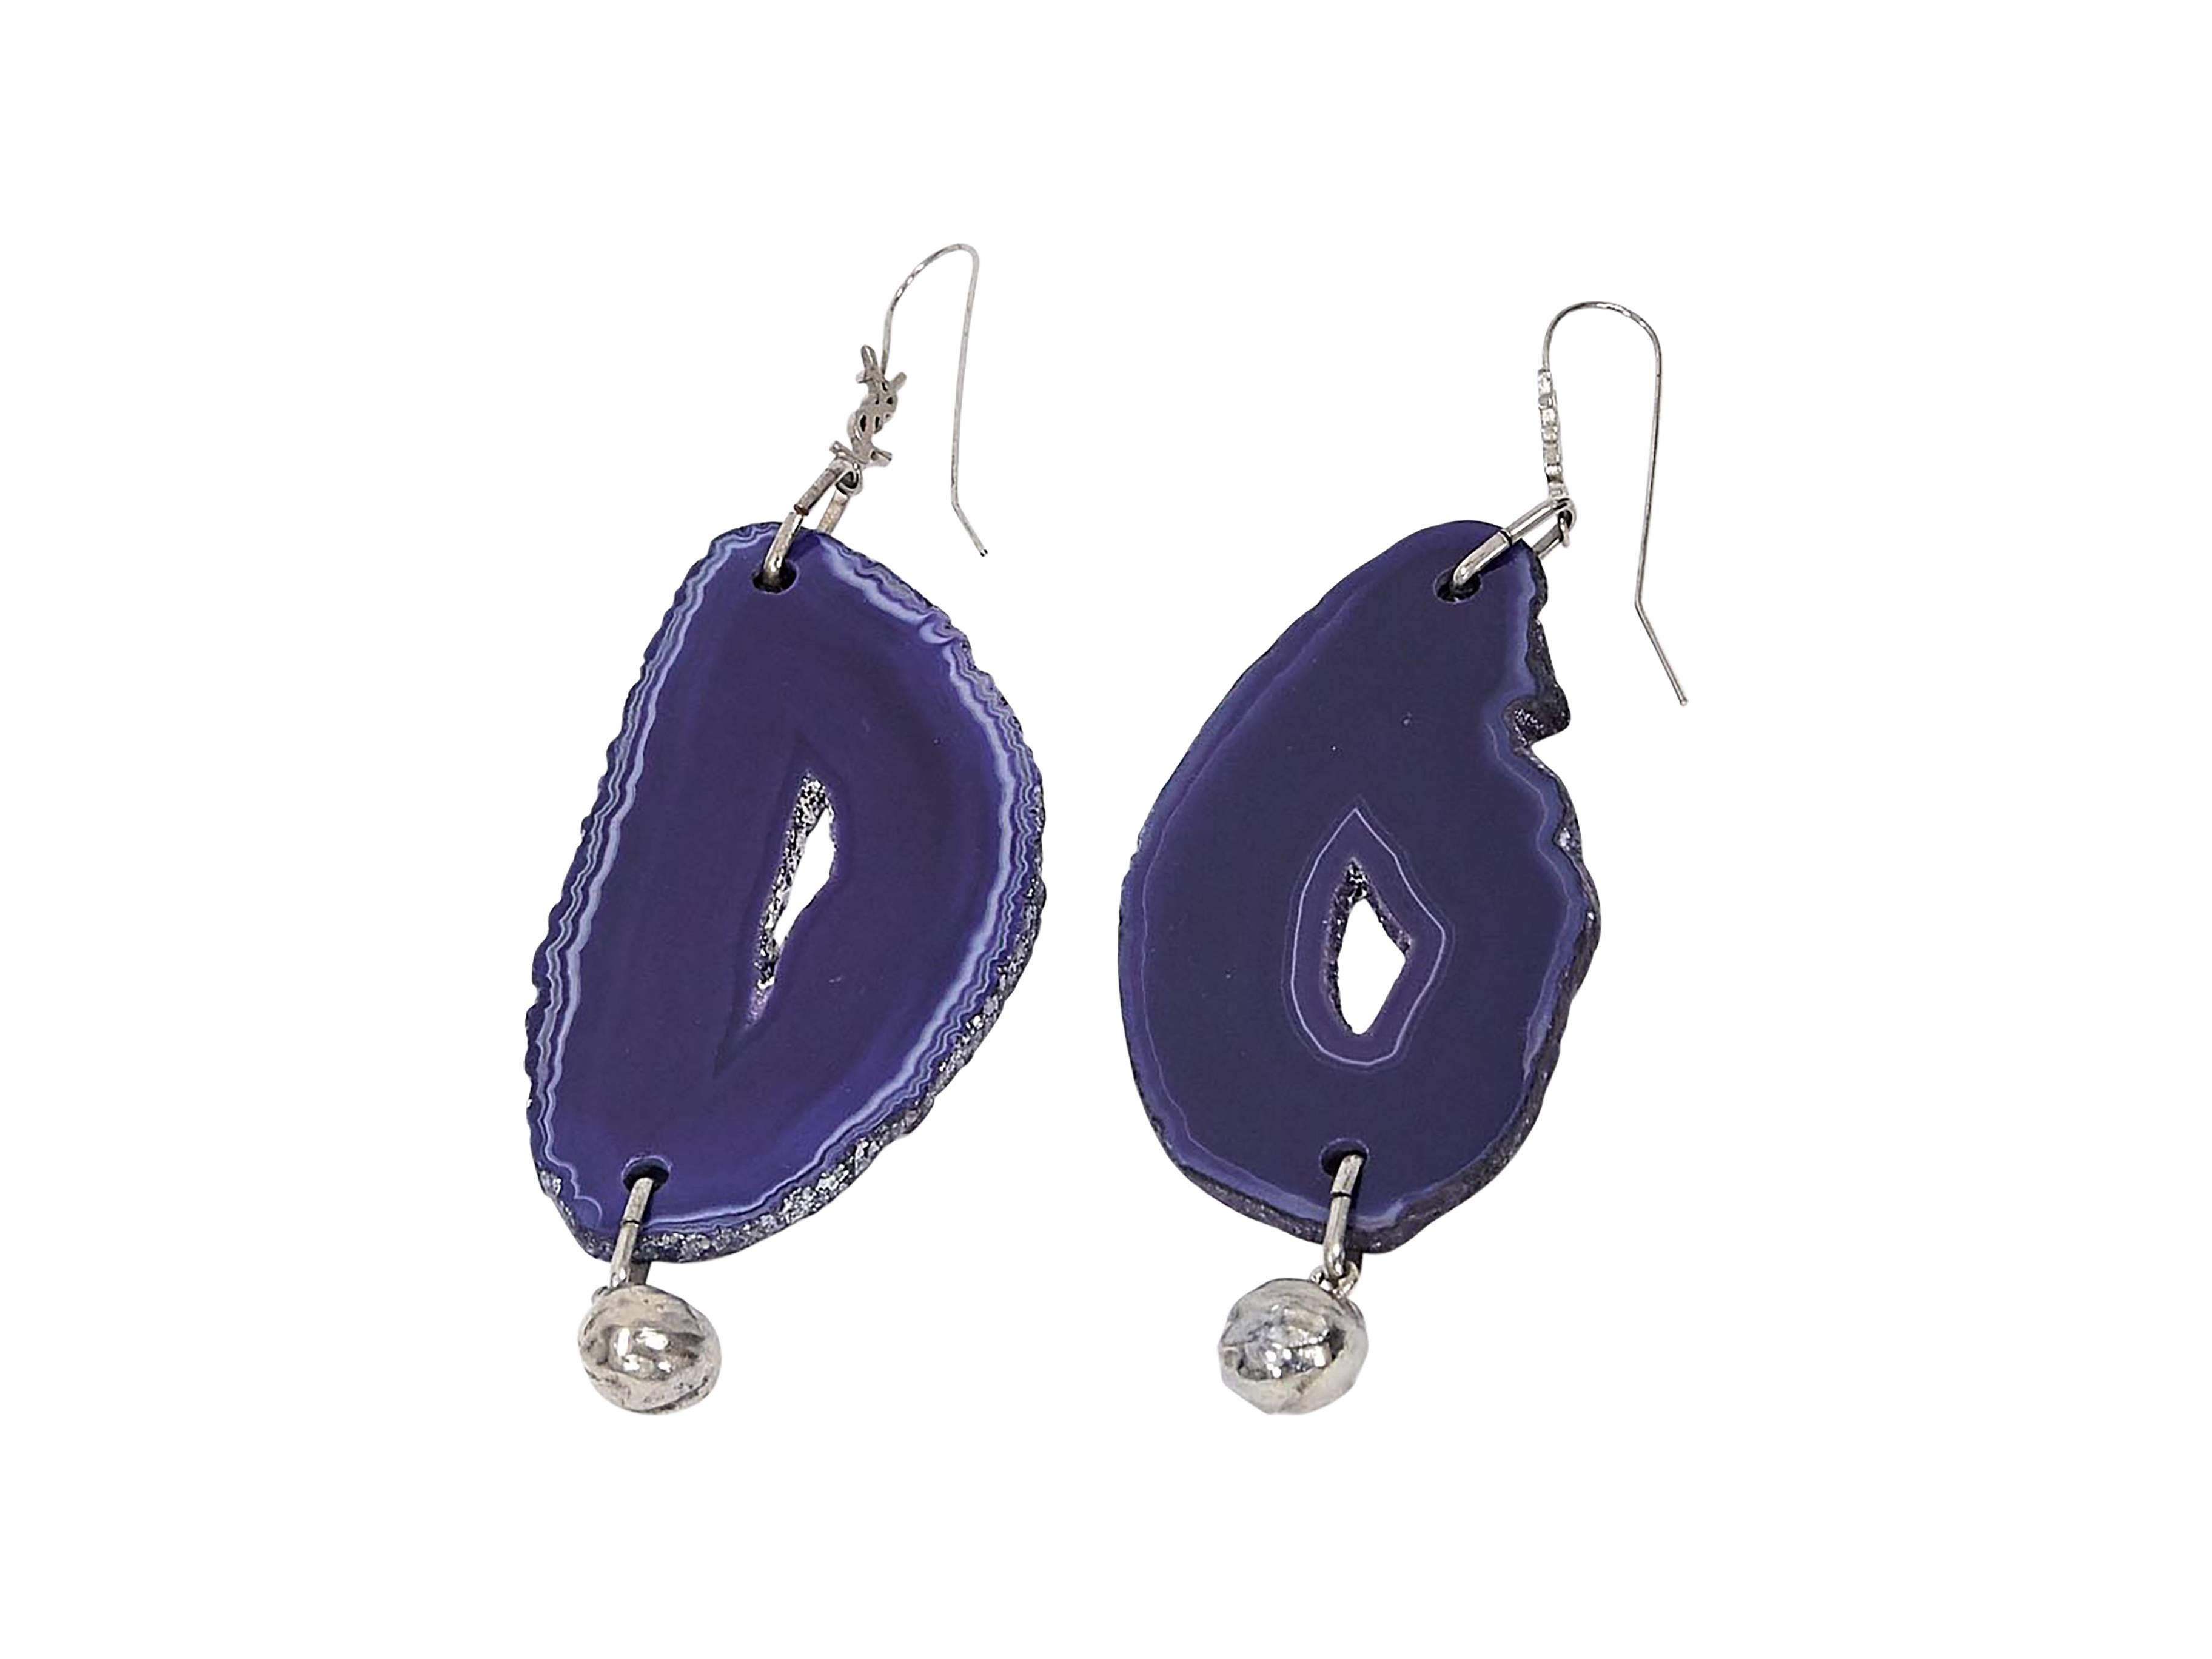 Product details:  Purple agate drop earrings by Yves Saint Laurent.  Accented with a ball charm.  Hook backing.  Silvertone hardware.  4.5